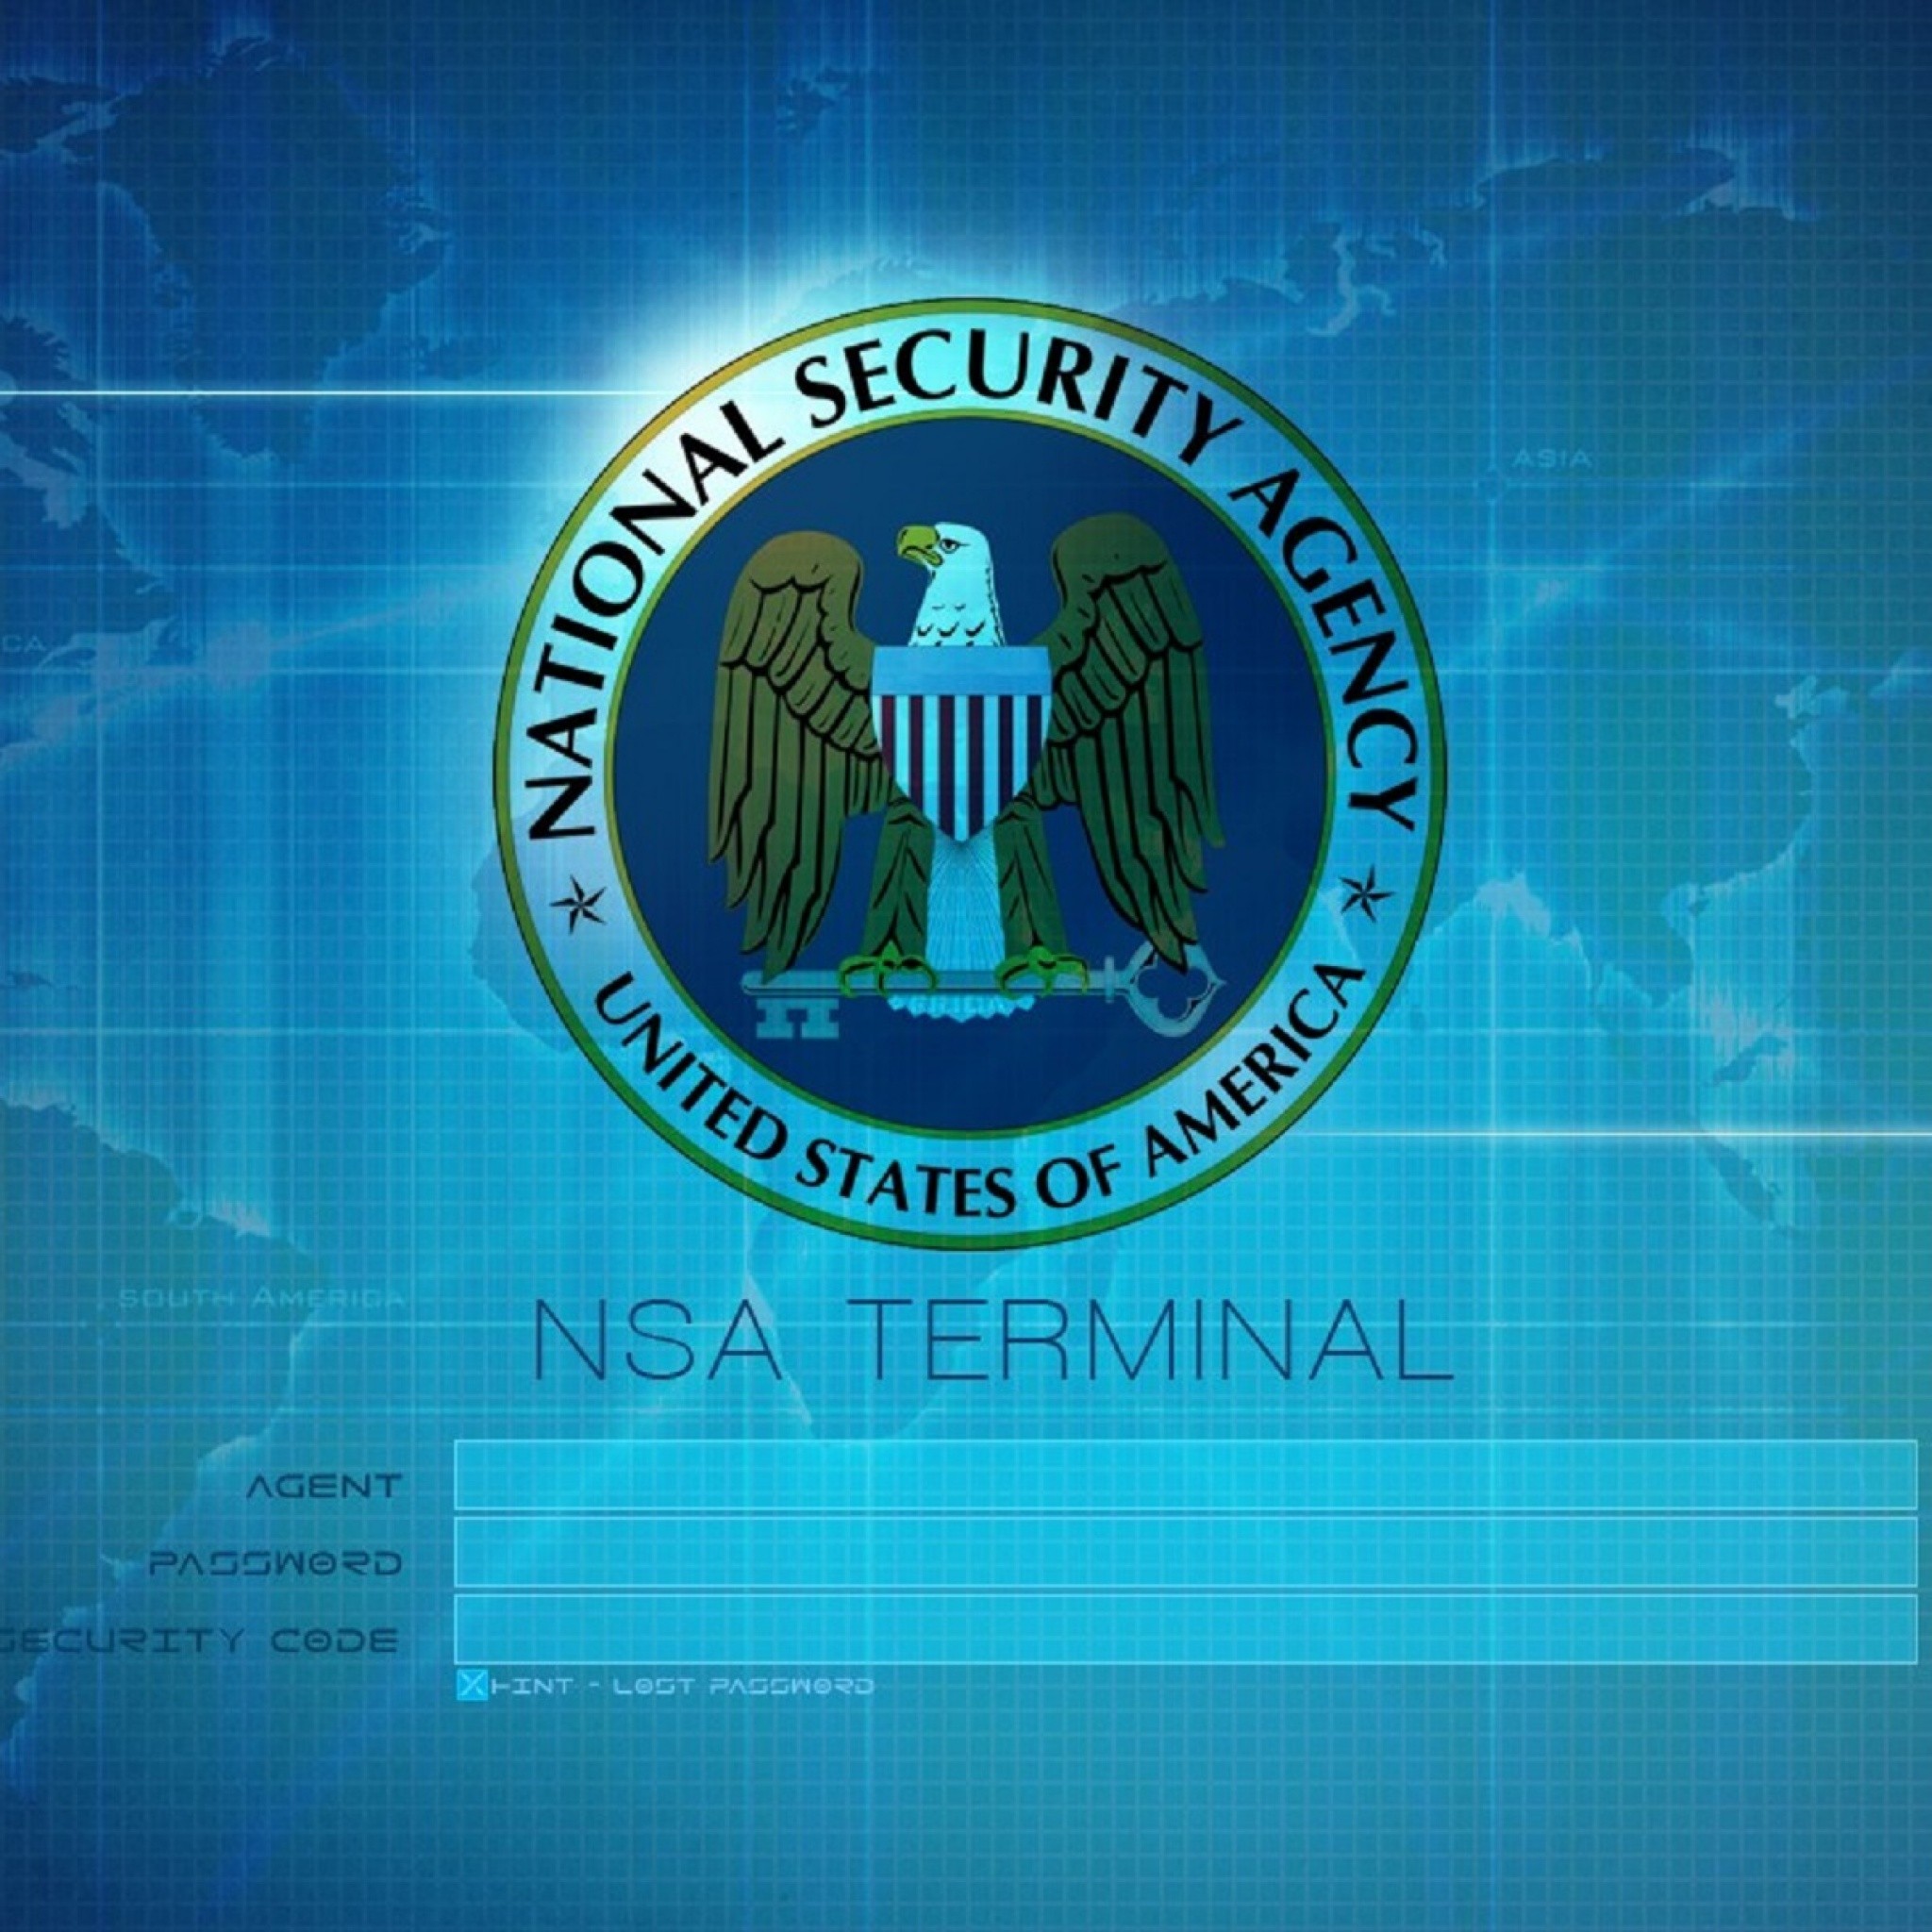 Terminal security. National Security Agency Wallpaper. Экран Пентагона. Обои на тему рефералы. Securing the State.